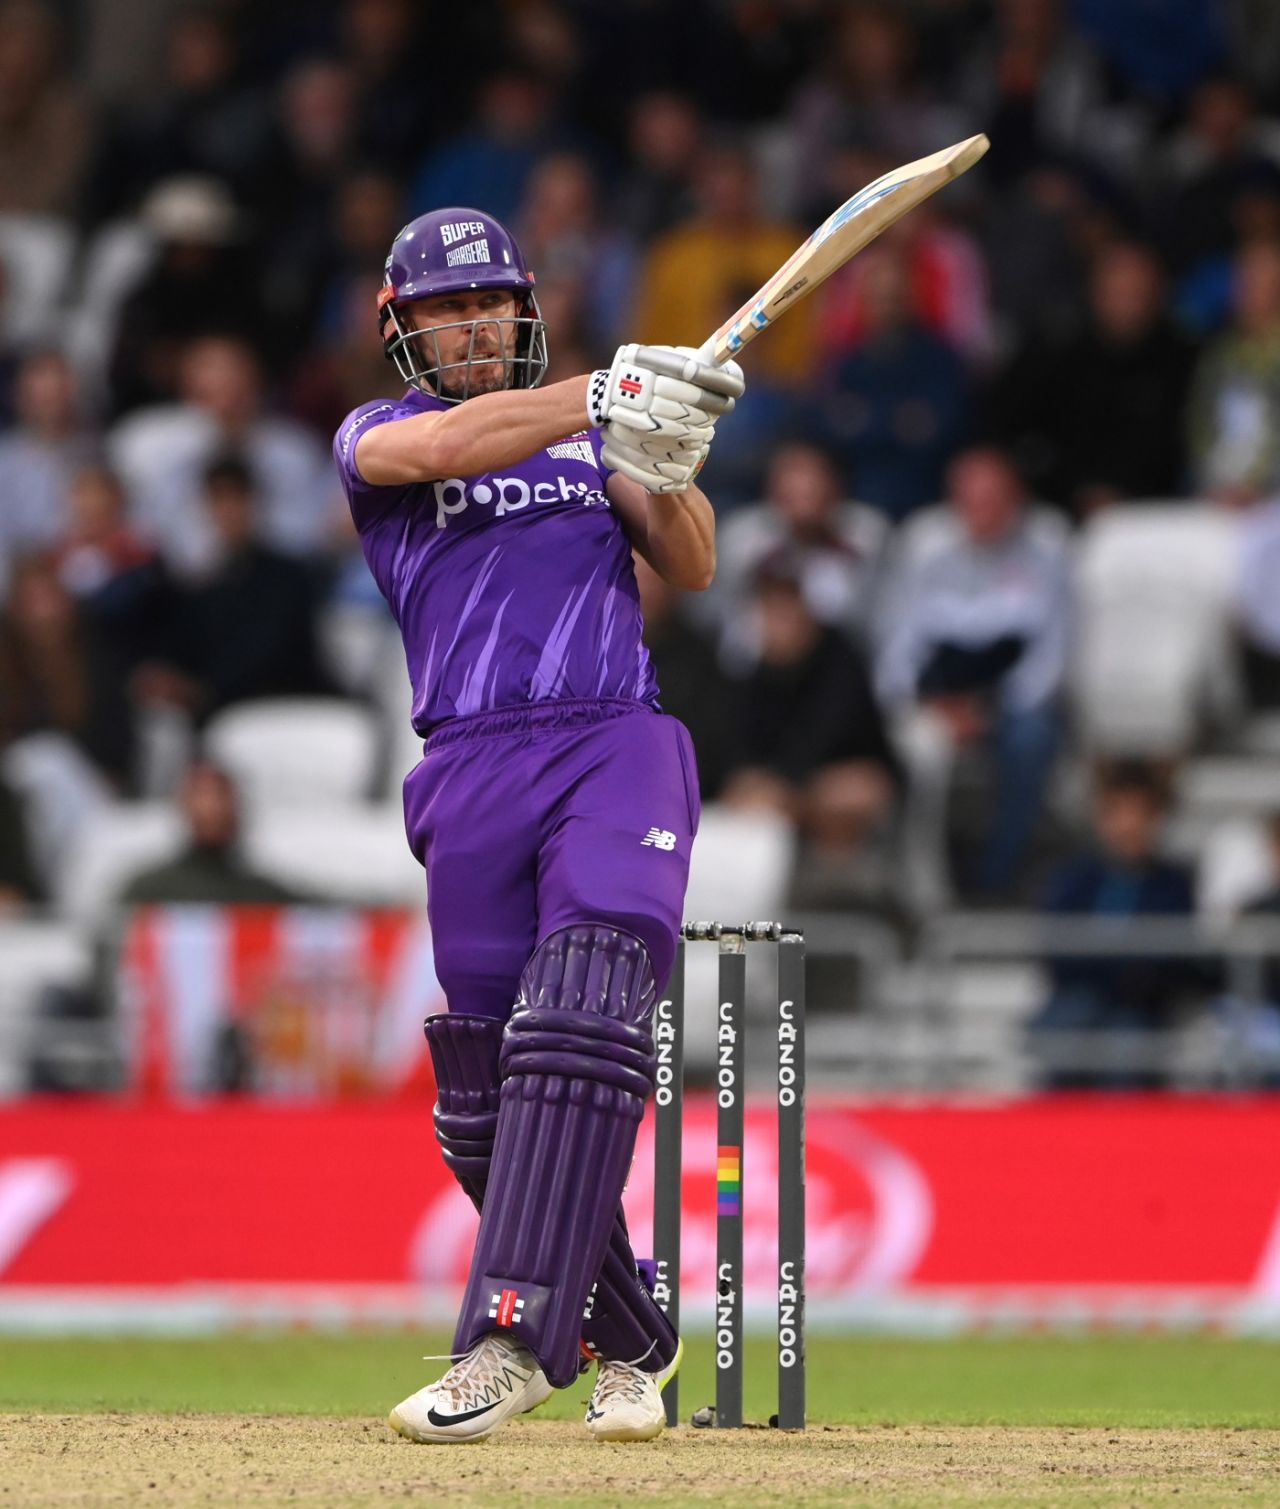 Chris Lynn climbs into a fierce pull shot, Northern Superchargers vs Oval Invincibles, Men's Hundred 2021, Headingley, July 21, 2021